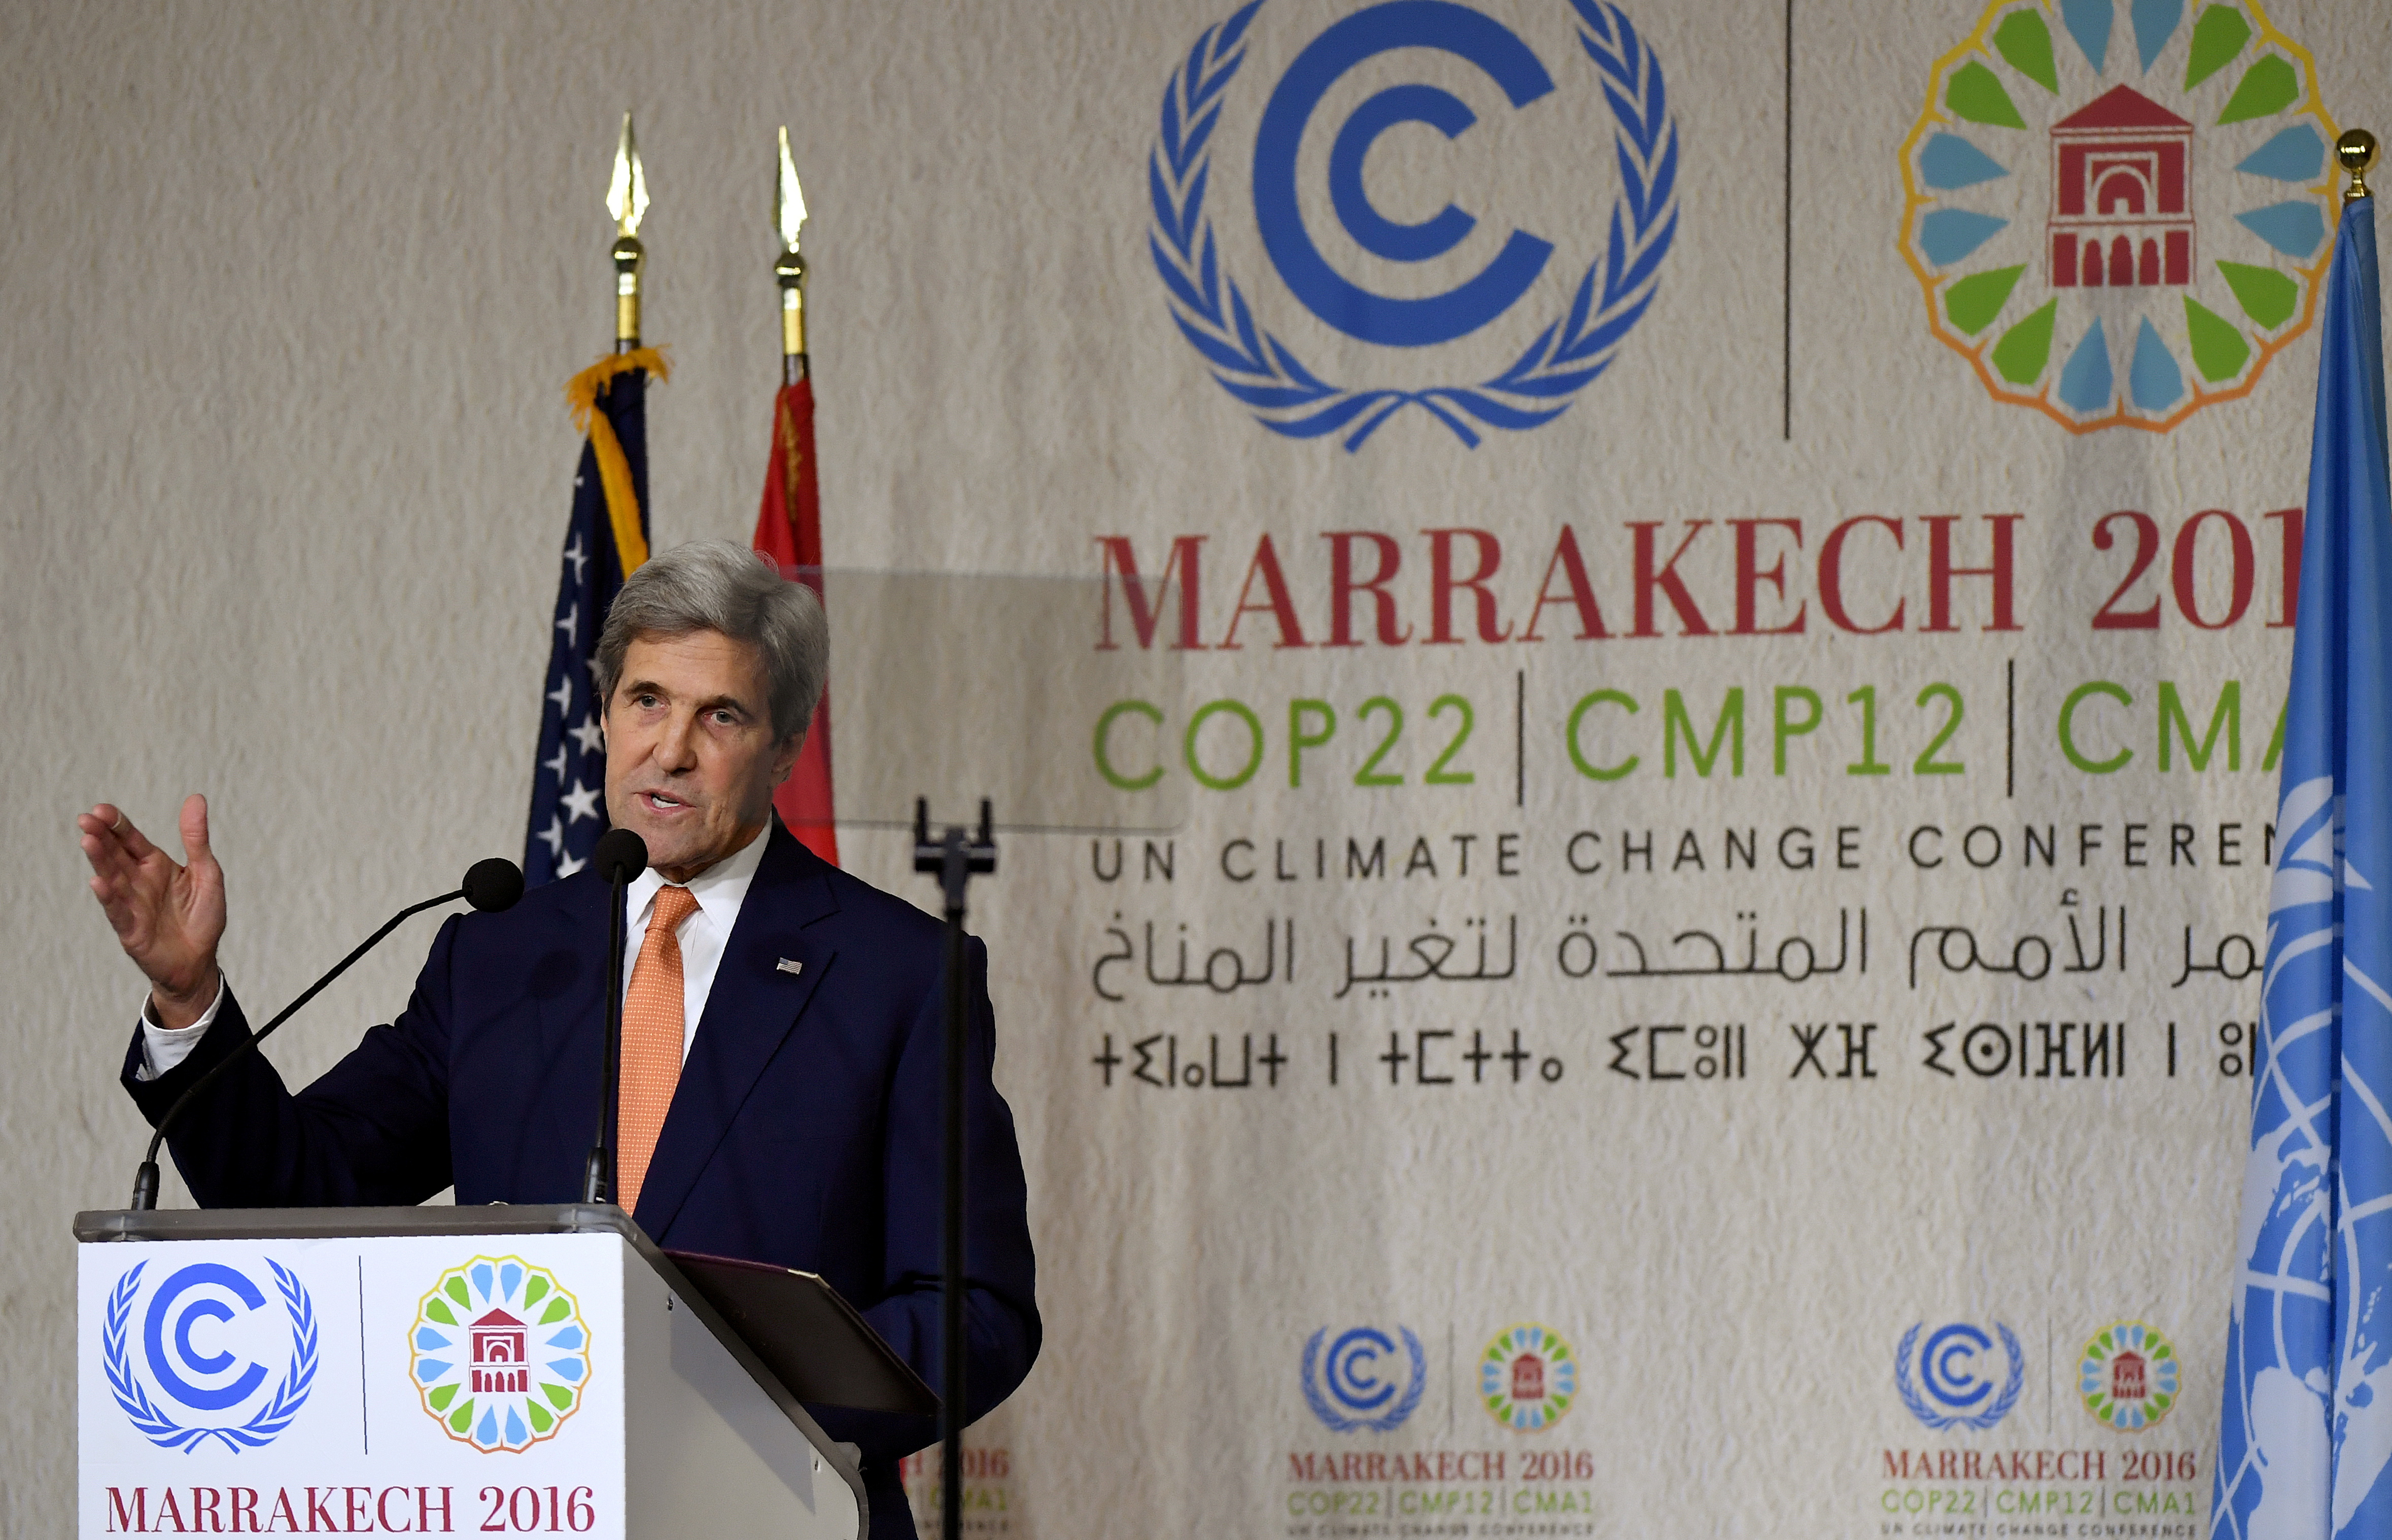 U.S. Secretary of State Kerry gives a speech at the COP22 Climate Change Conference in Marrakech